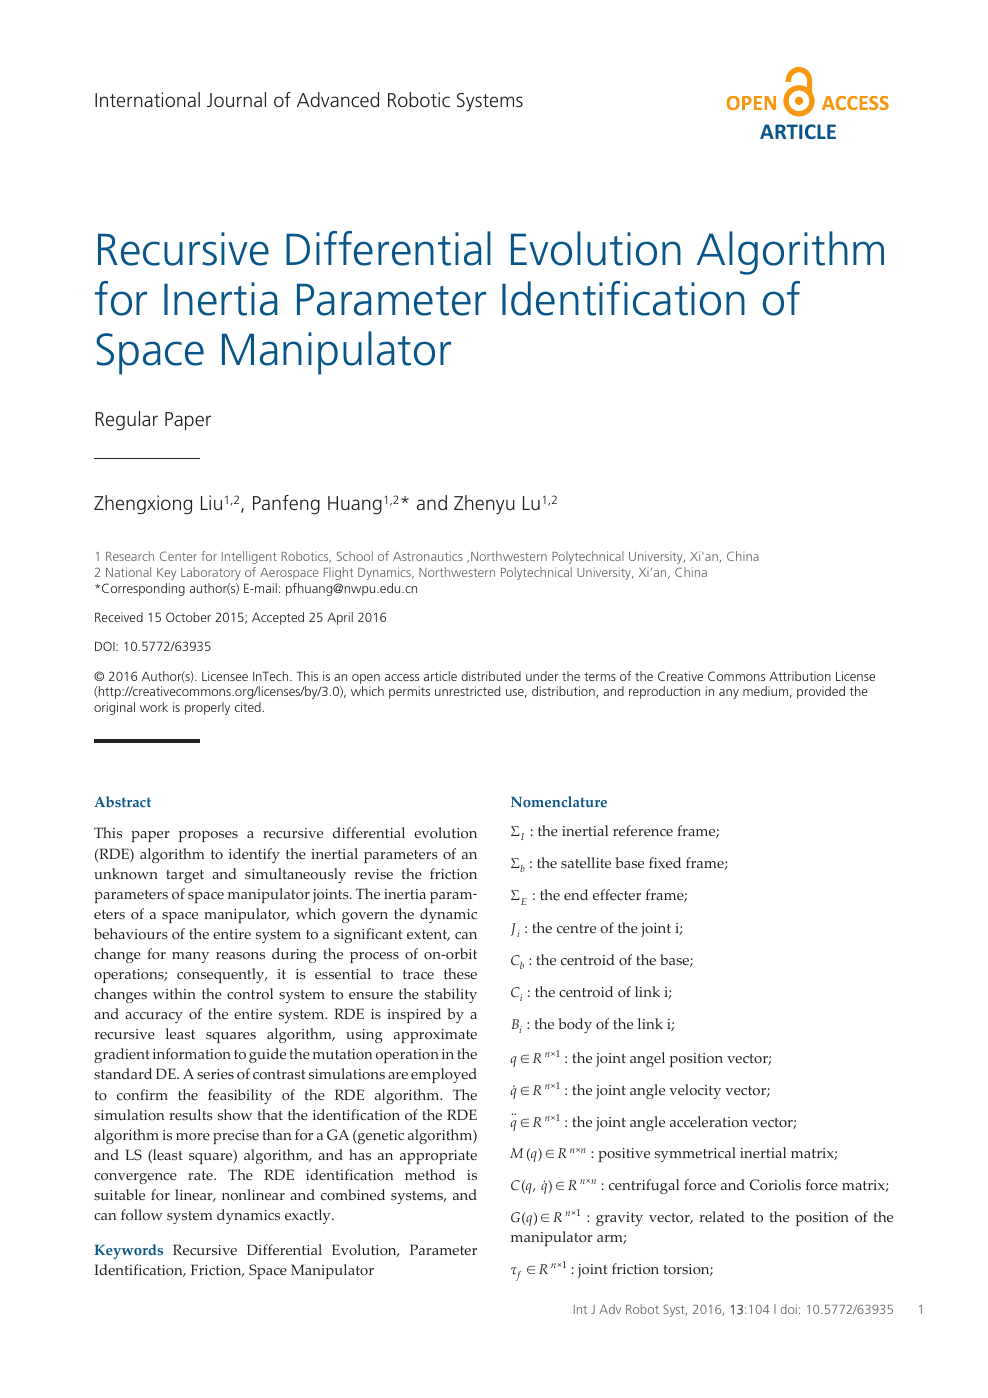 Recursive Differential Evolution Algorithm For Inertia Parameter Identification Of Space Manipulator Topic Of Research Paper In Mechanical Engineering Download Scholarly Article Pdf And Read For Free On Cyberleninka Open Science Hub